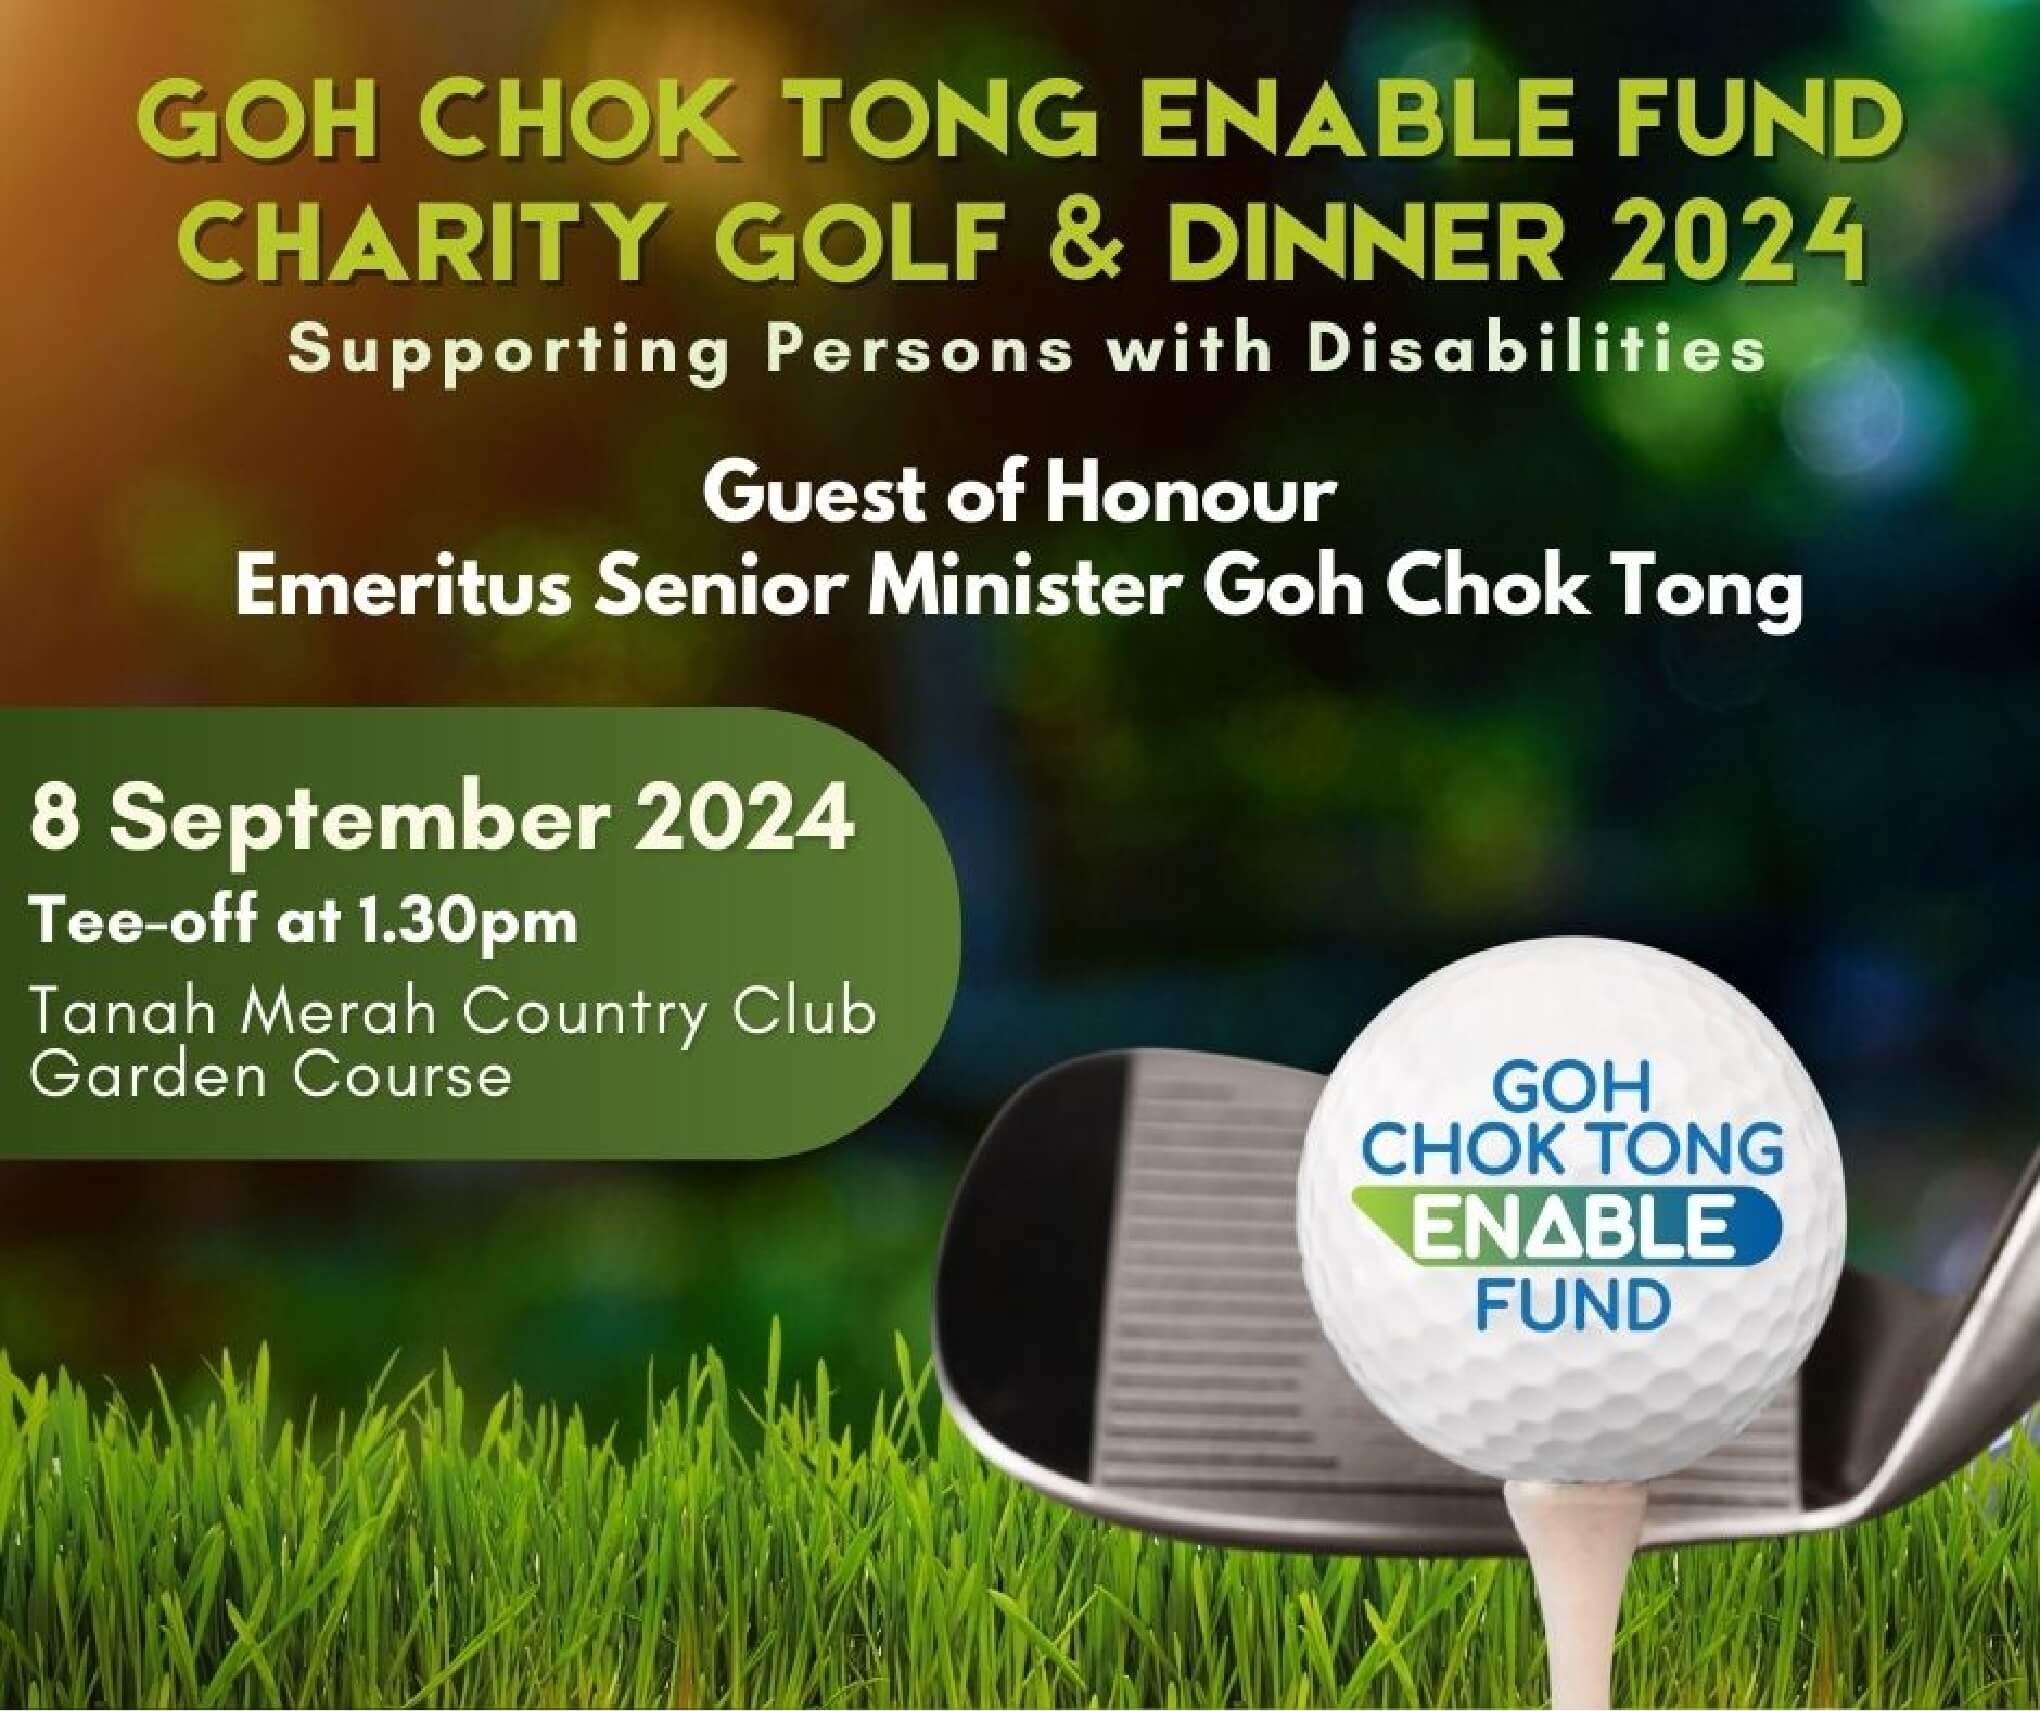 A picture containing details an event: Goh Chok Tong Enable Fund Charity Golf and Dinner 2024 – supporting persons with disabilities. Guest of Honour: Emeritus Senior Minister Goh Chok Tong. Date of event: 8 September 2024. Time: Tee-off at 1.30pm. Venue: Tanah Merah Country Club, Garden Course.